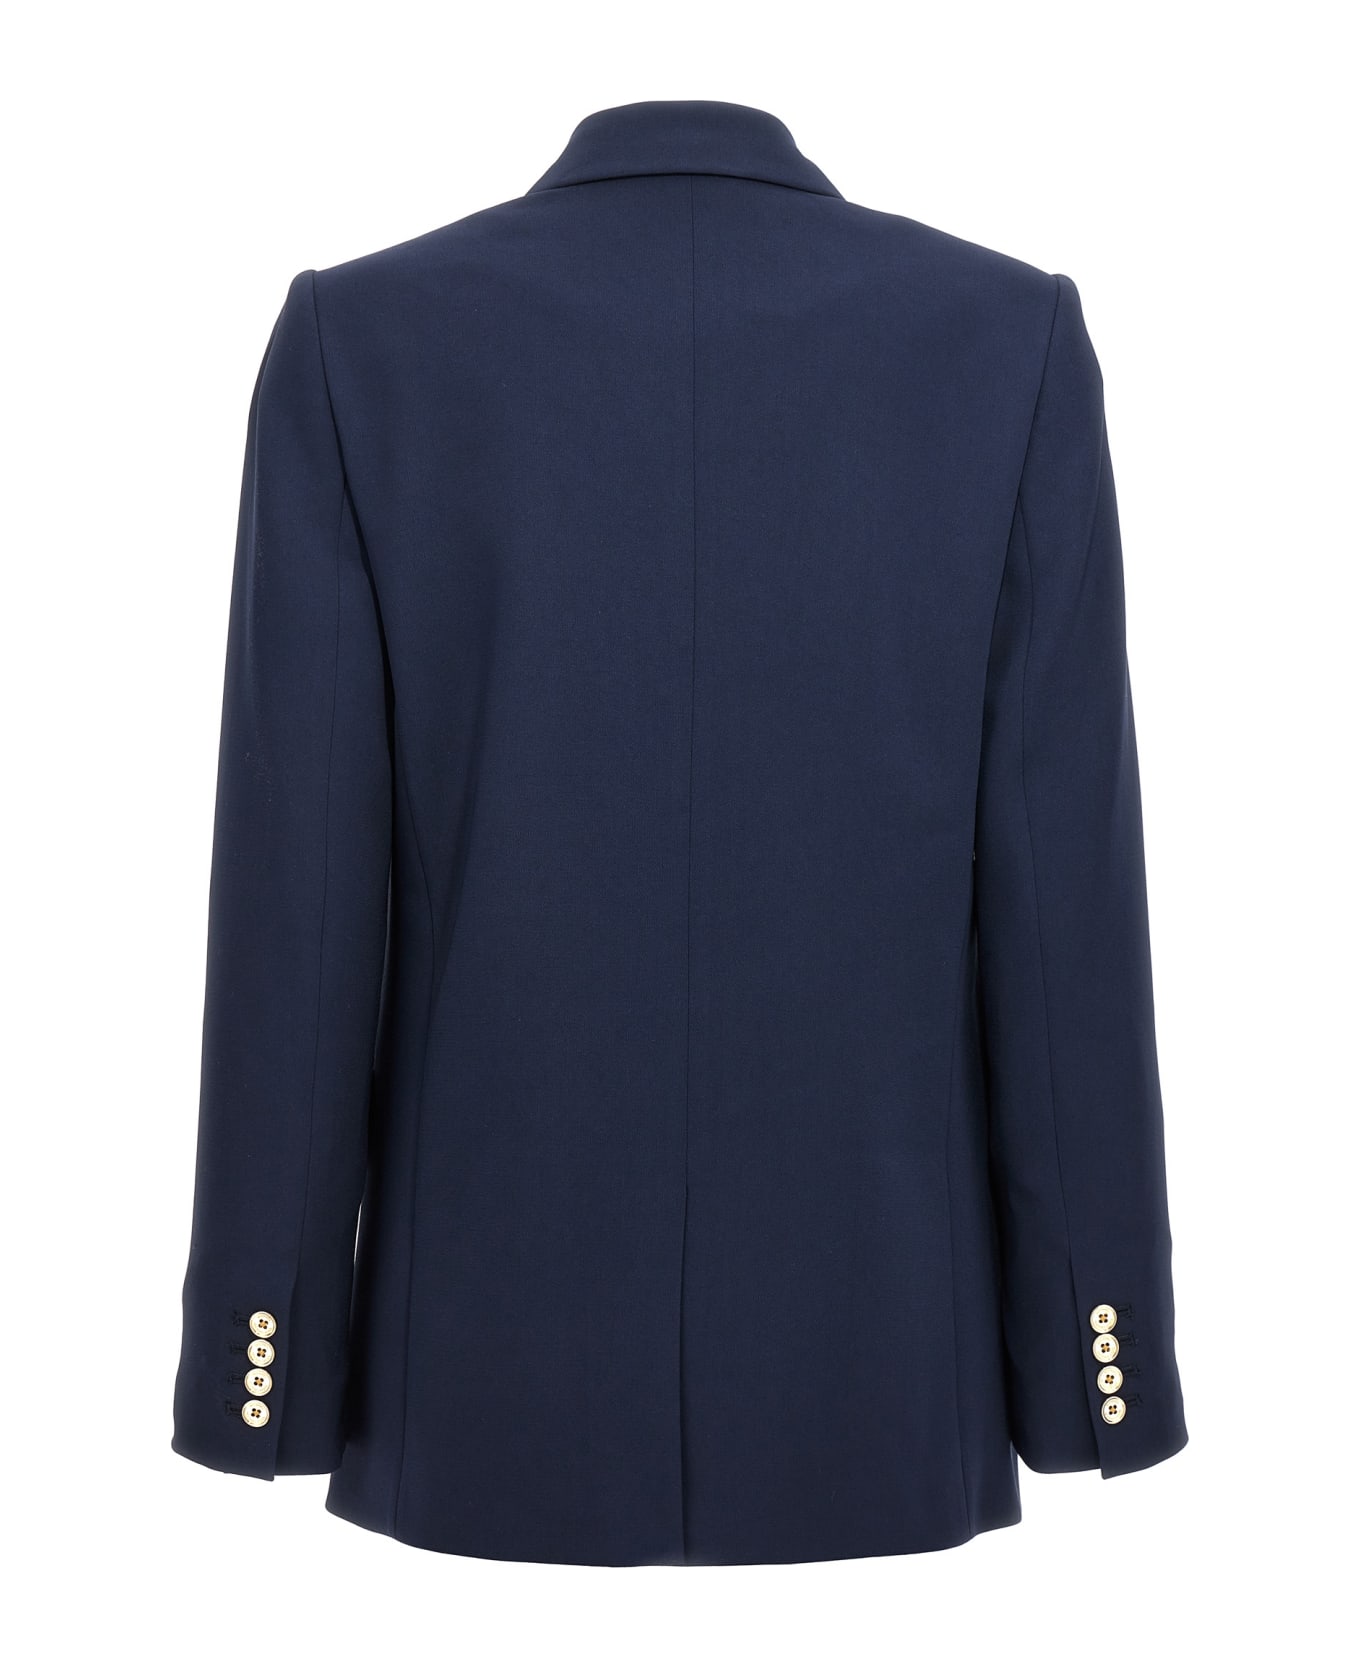 MICHAEL Michael Kors Double-breasted Buttoned Blazer - Midnight Blue